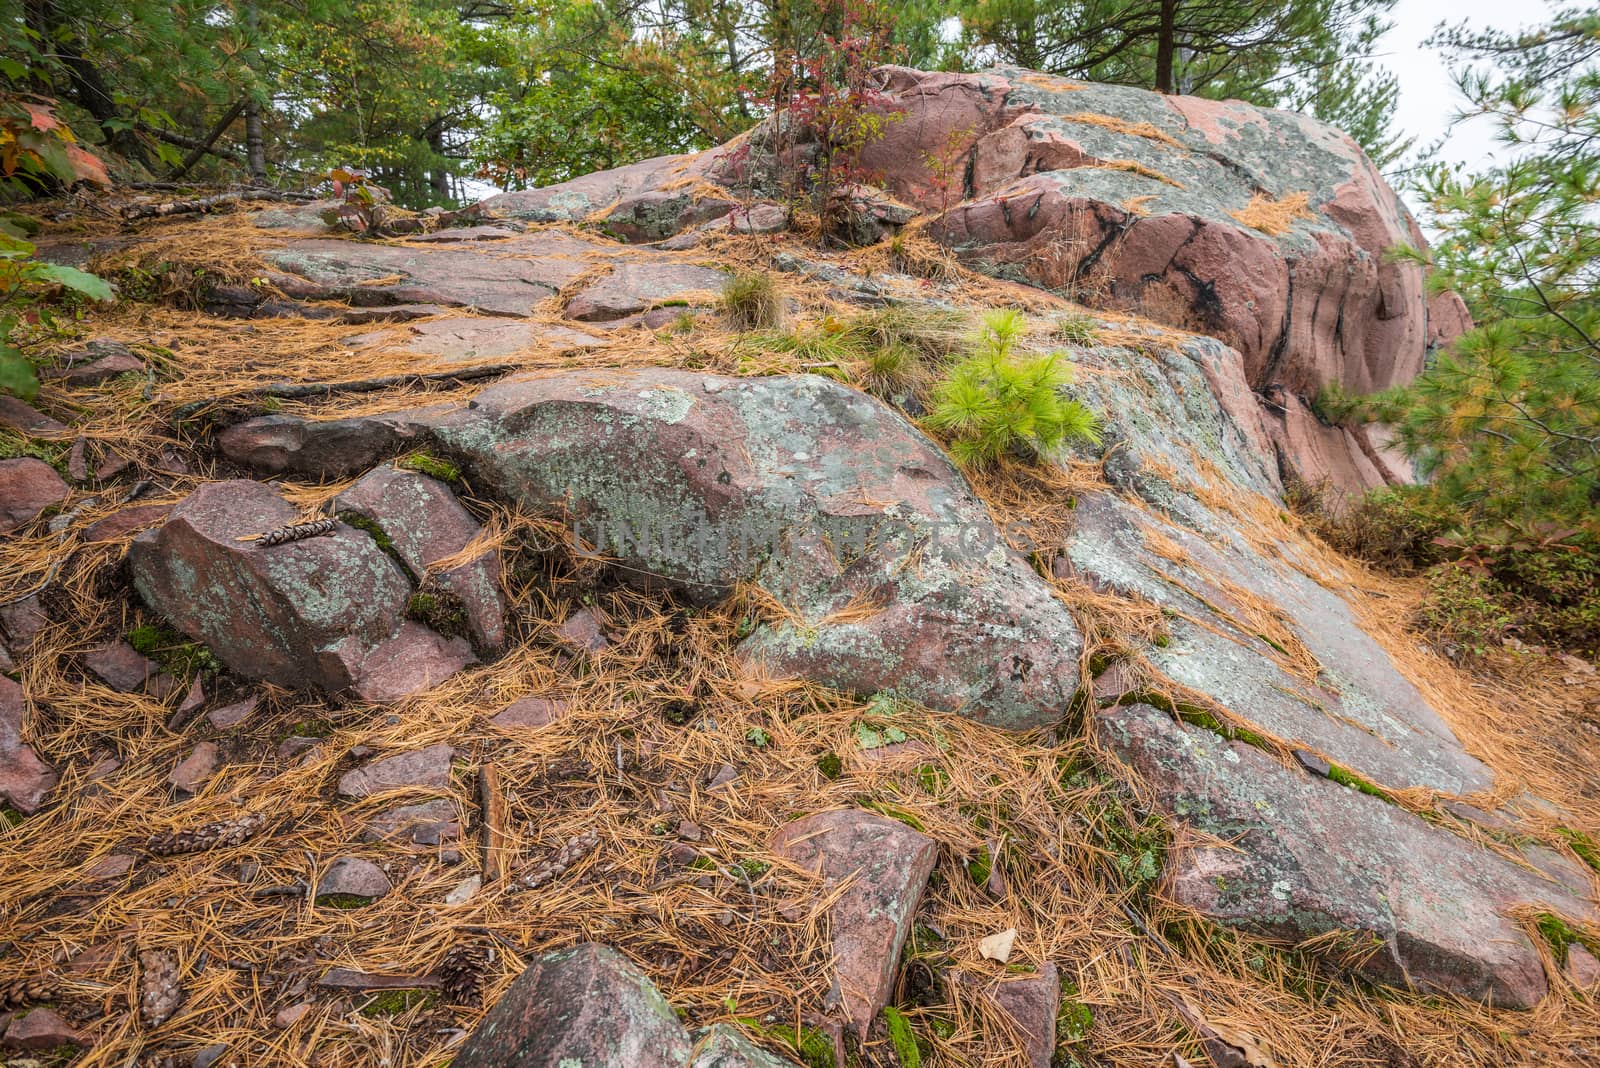 Close up view of geological structures and pink stones at Killarney Provincial Park, Canada